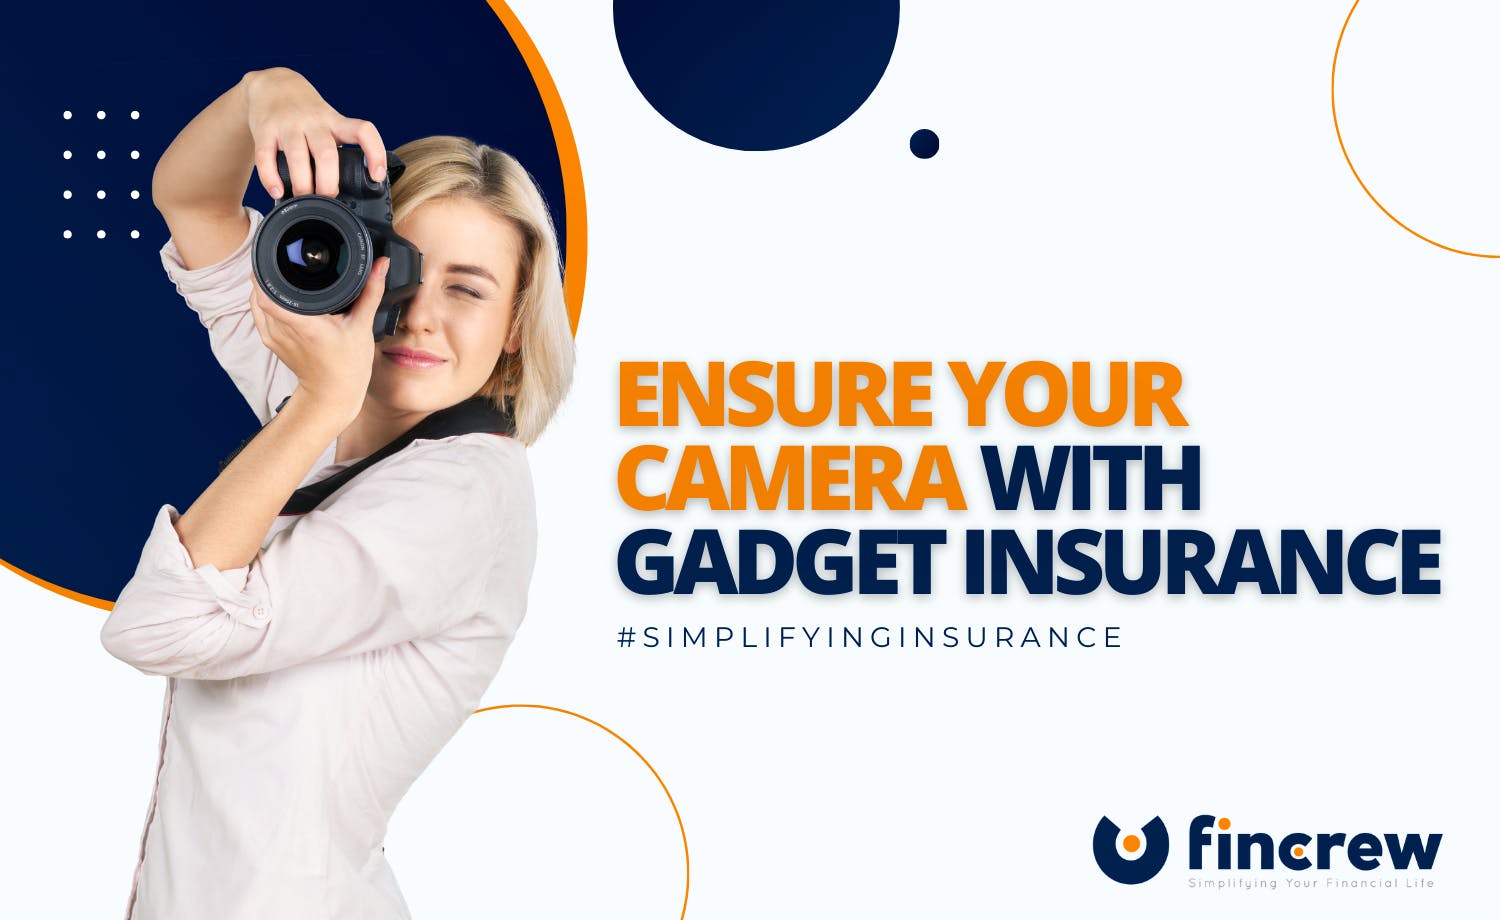 Ensure Your Camera With Gadget Insurance